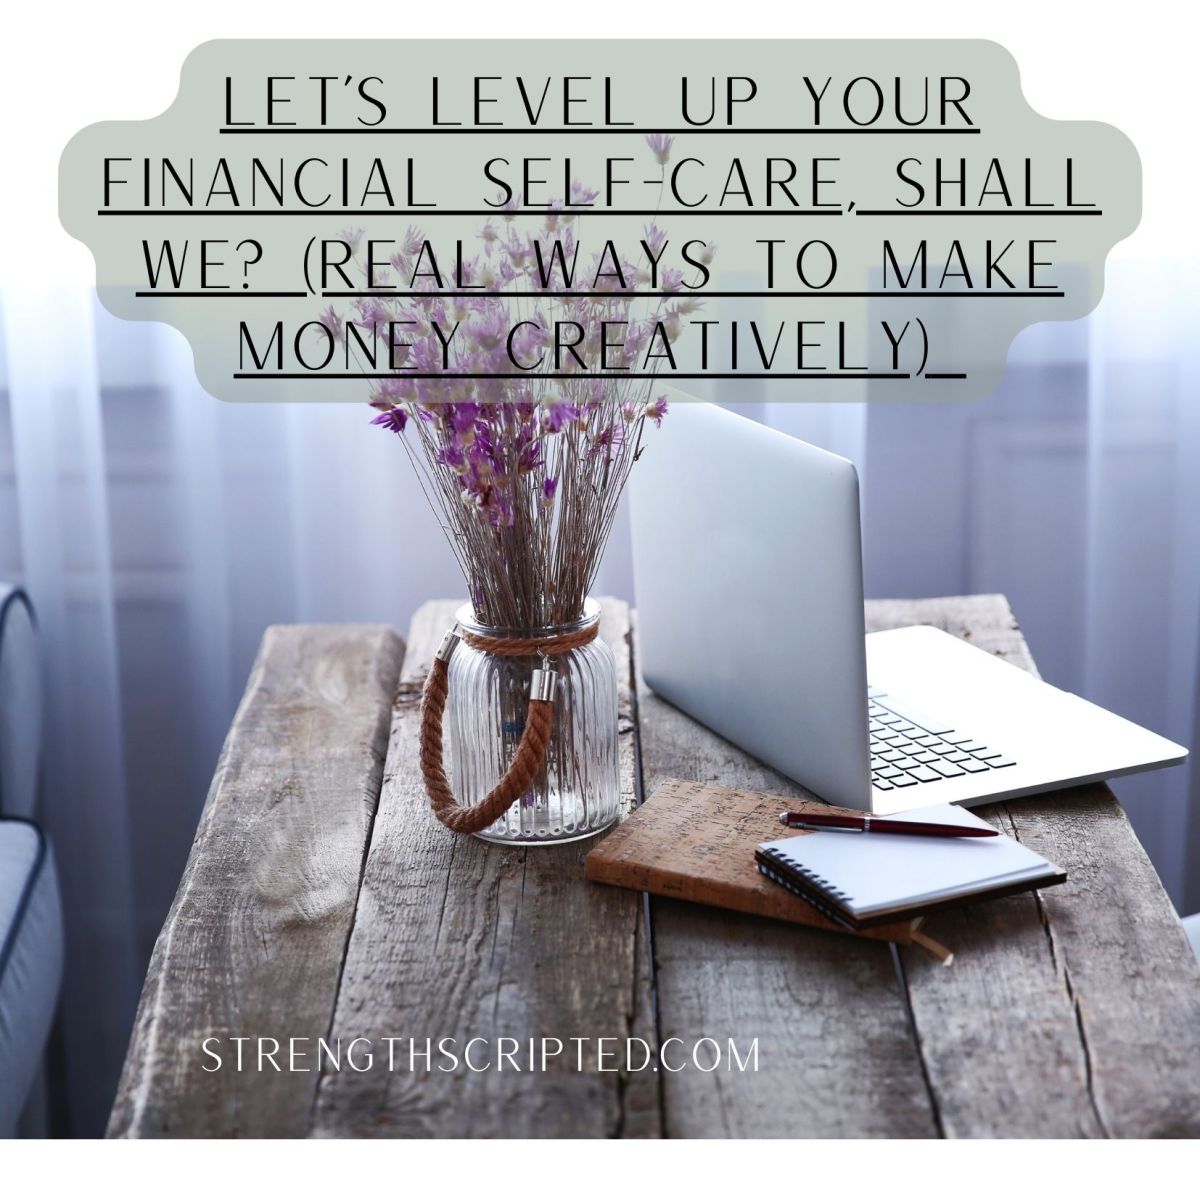 Let’s level up your financial self-care, shall we? (Real ways to make money creatively) 